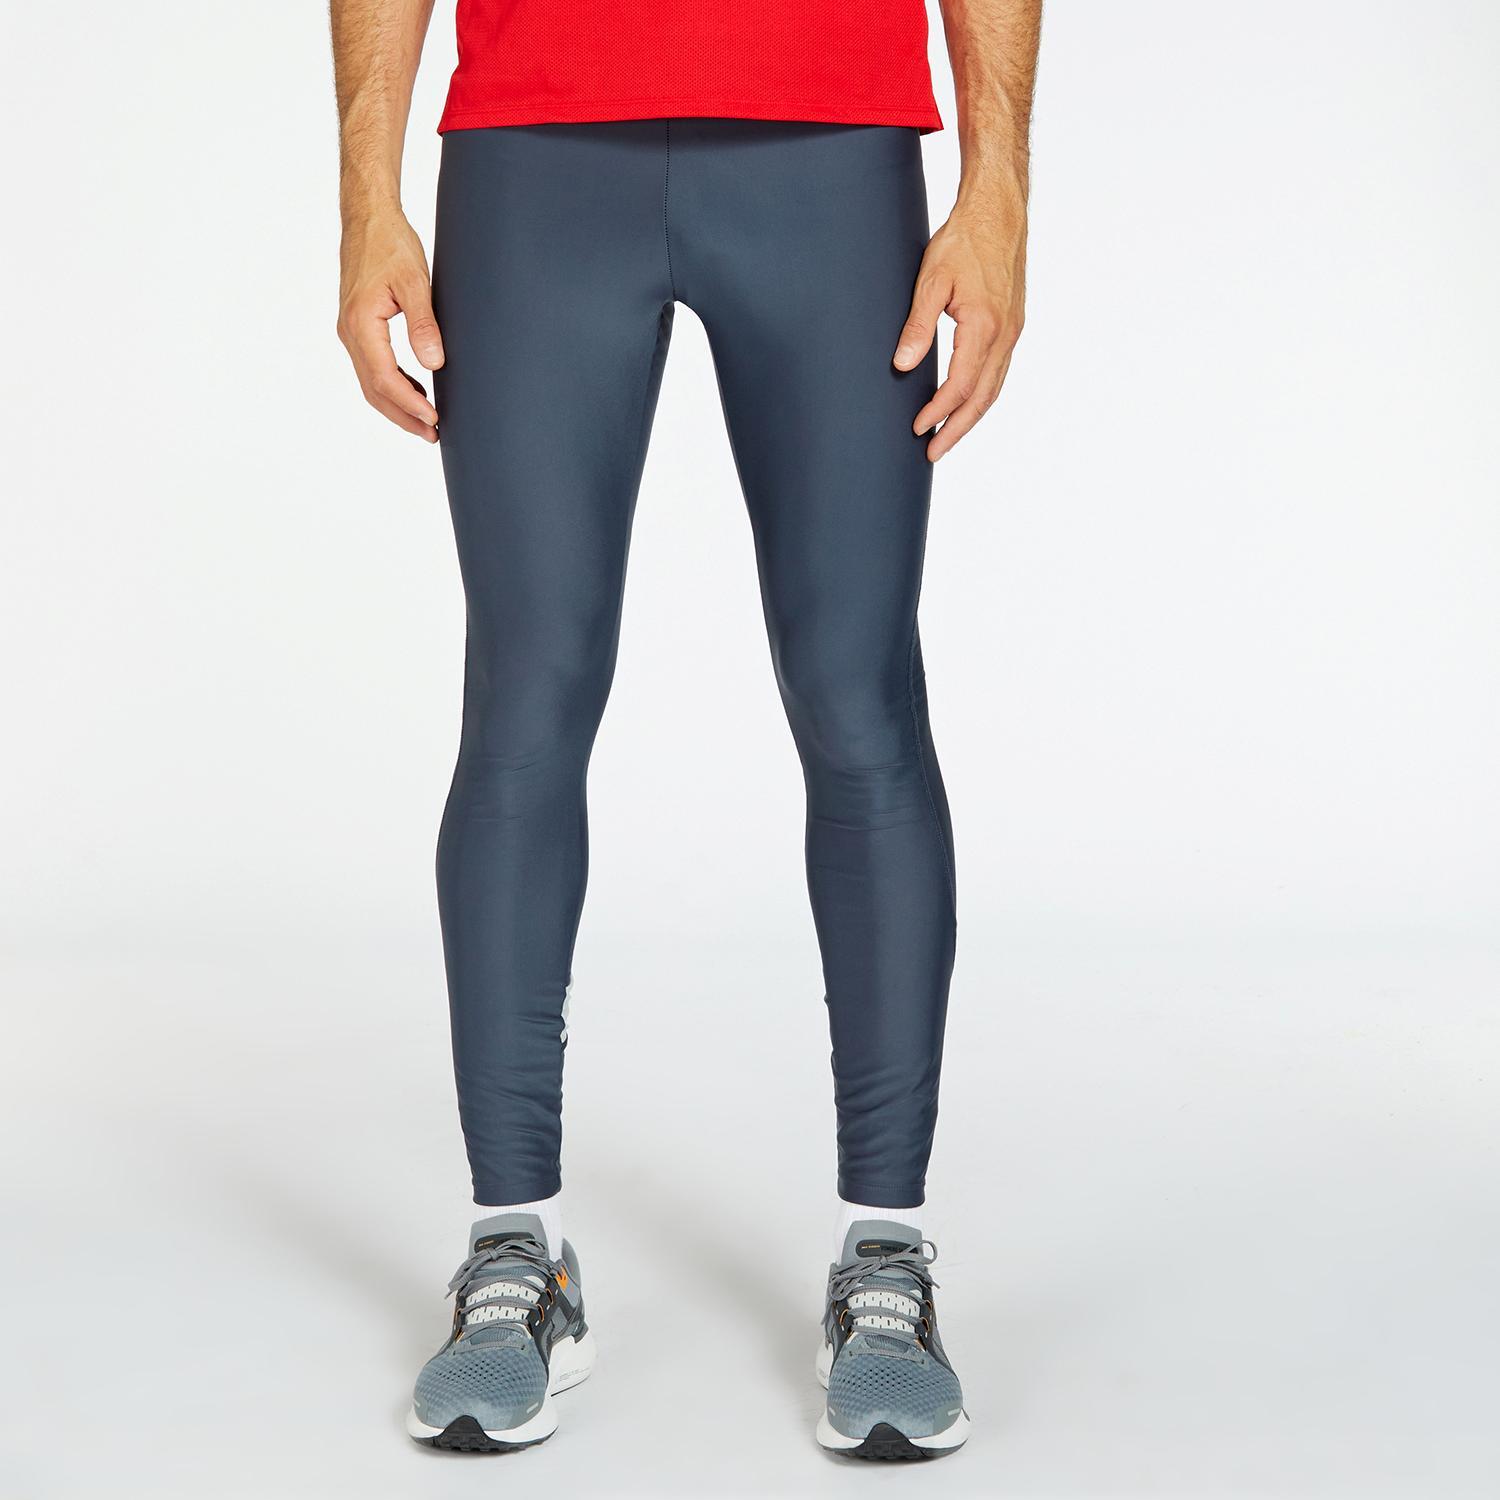 Ipso Combi-Gris-Legging Running Homme sports taille M